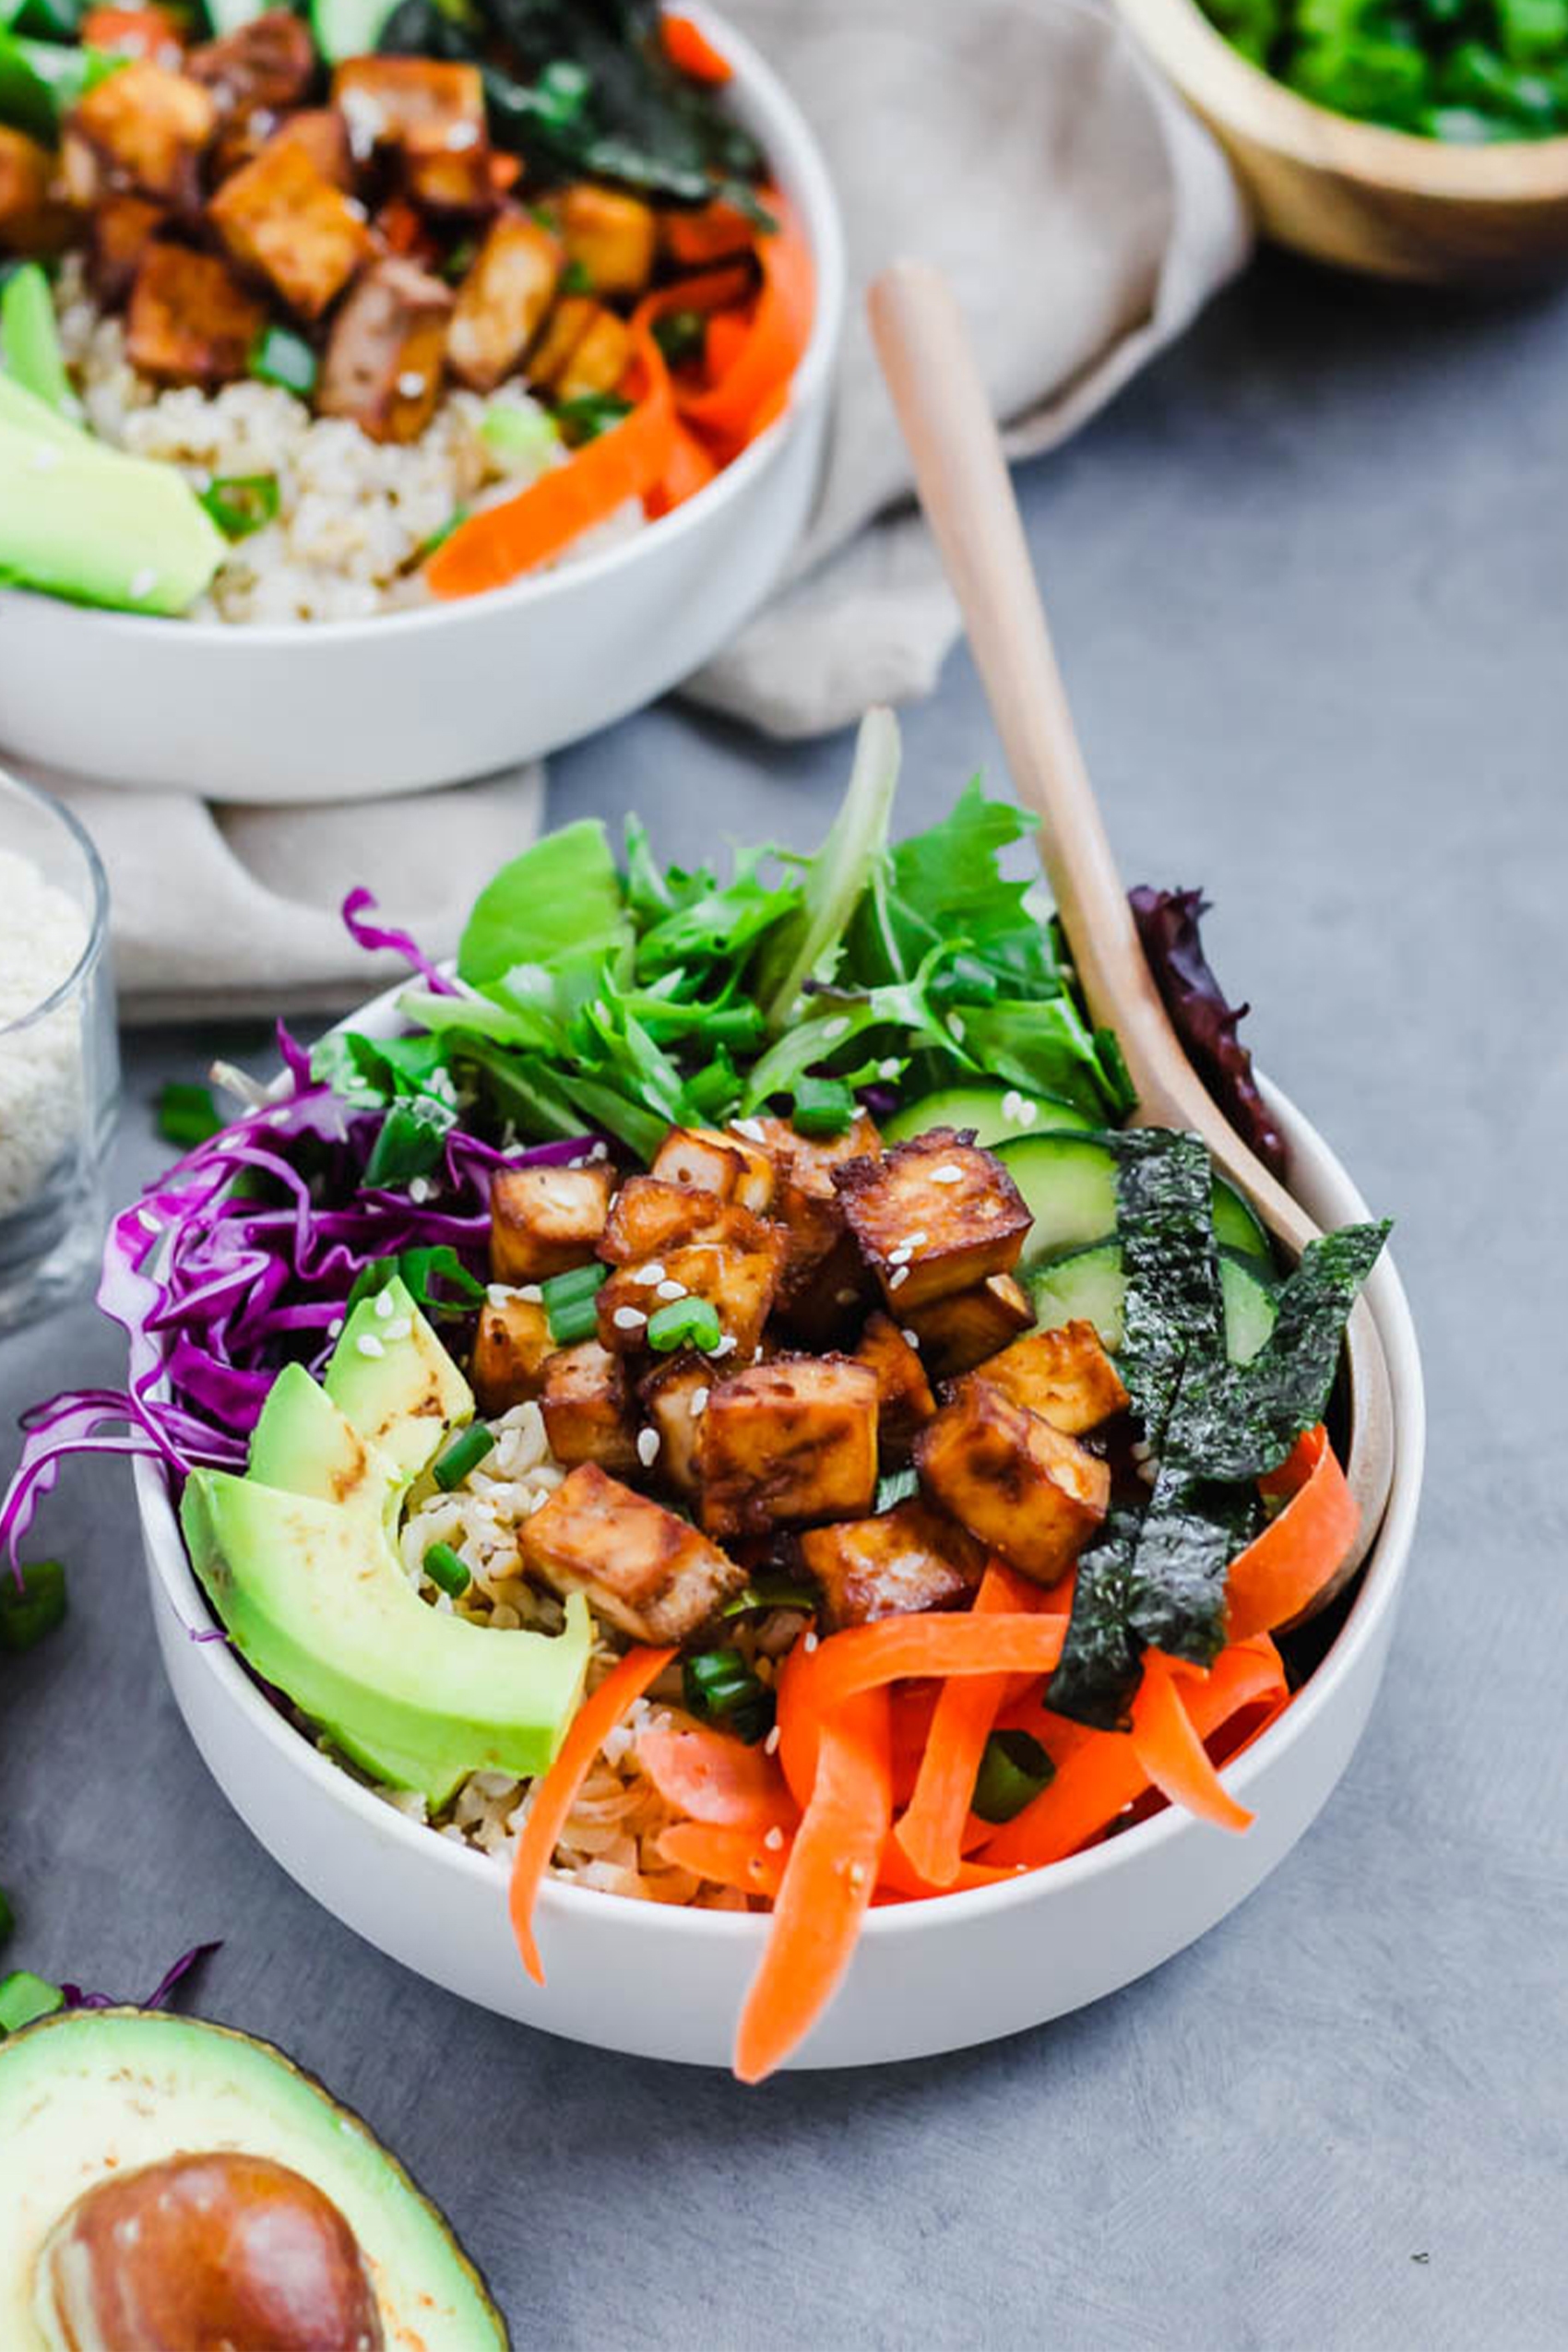 a vegan poke bowl with tofu, carrots, avocado, greens, cabbage and seaweed strips